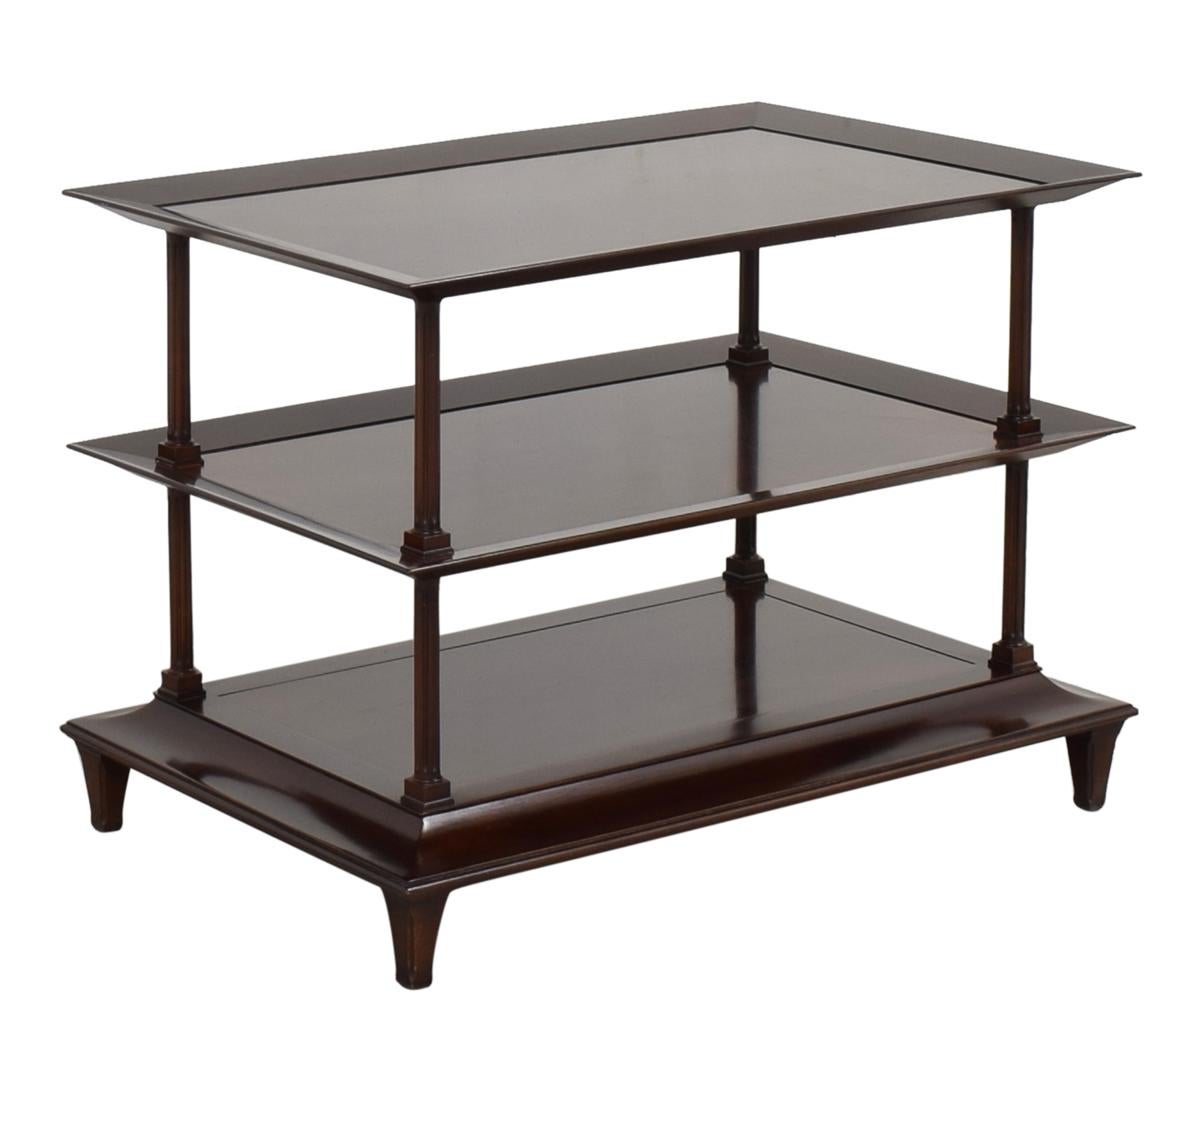 Barbara Berry for Baker Furniture company, three-tiered occasional, side table. Mahogany. Rare custom rectangular model. I believe this is the deep brown java finish. Reeded columns.
Measures: 39